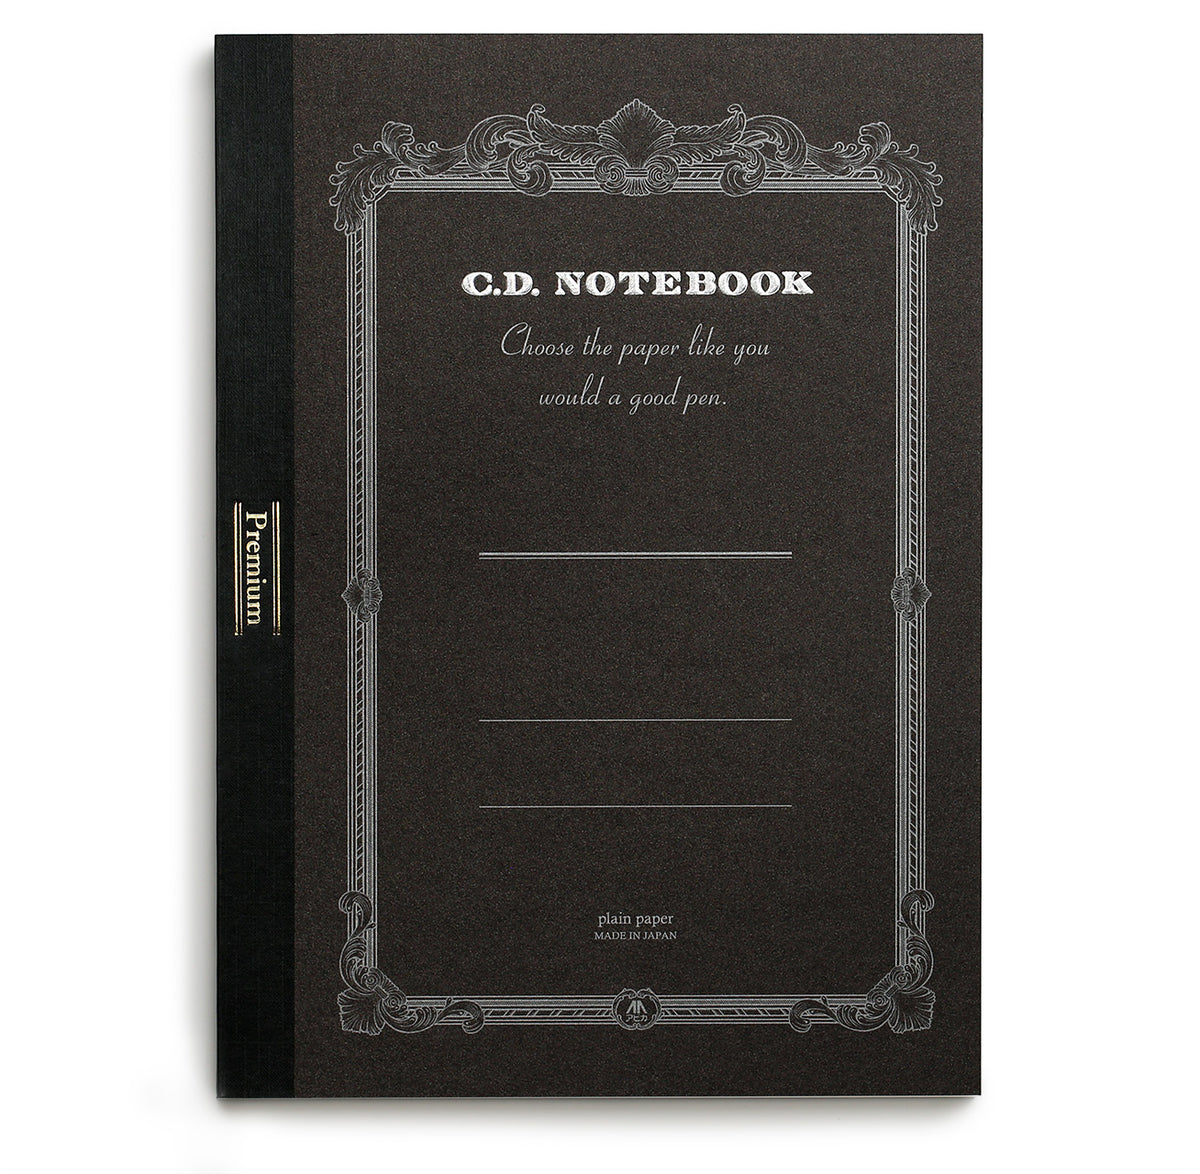 Premium CD notebook with blank pages and index page in front